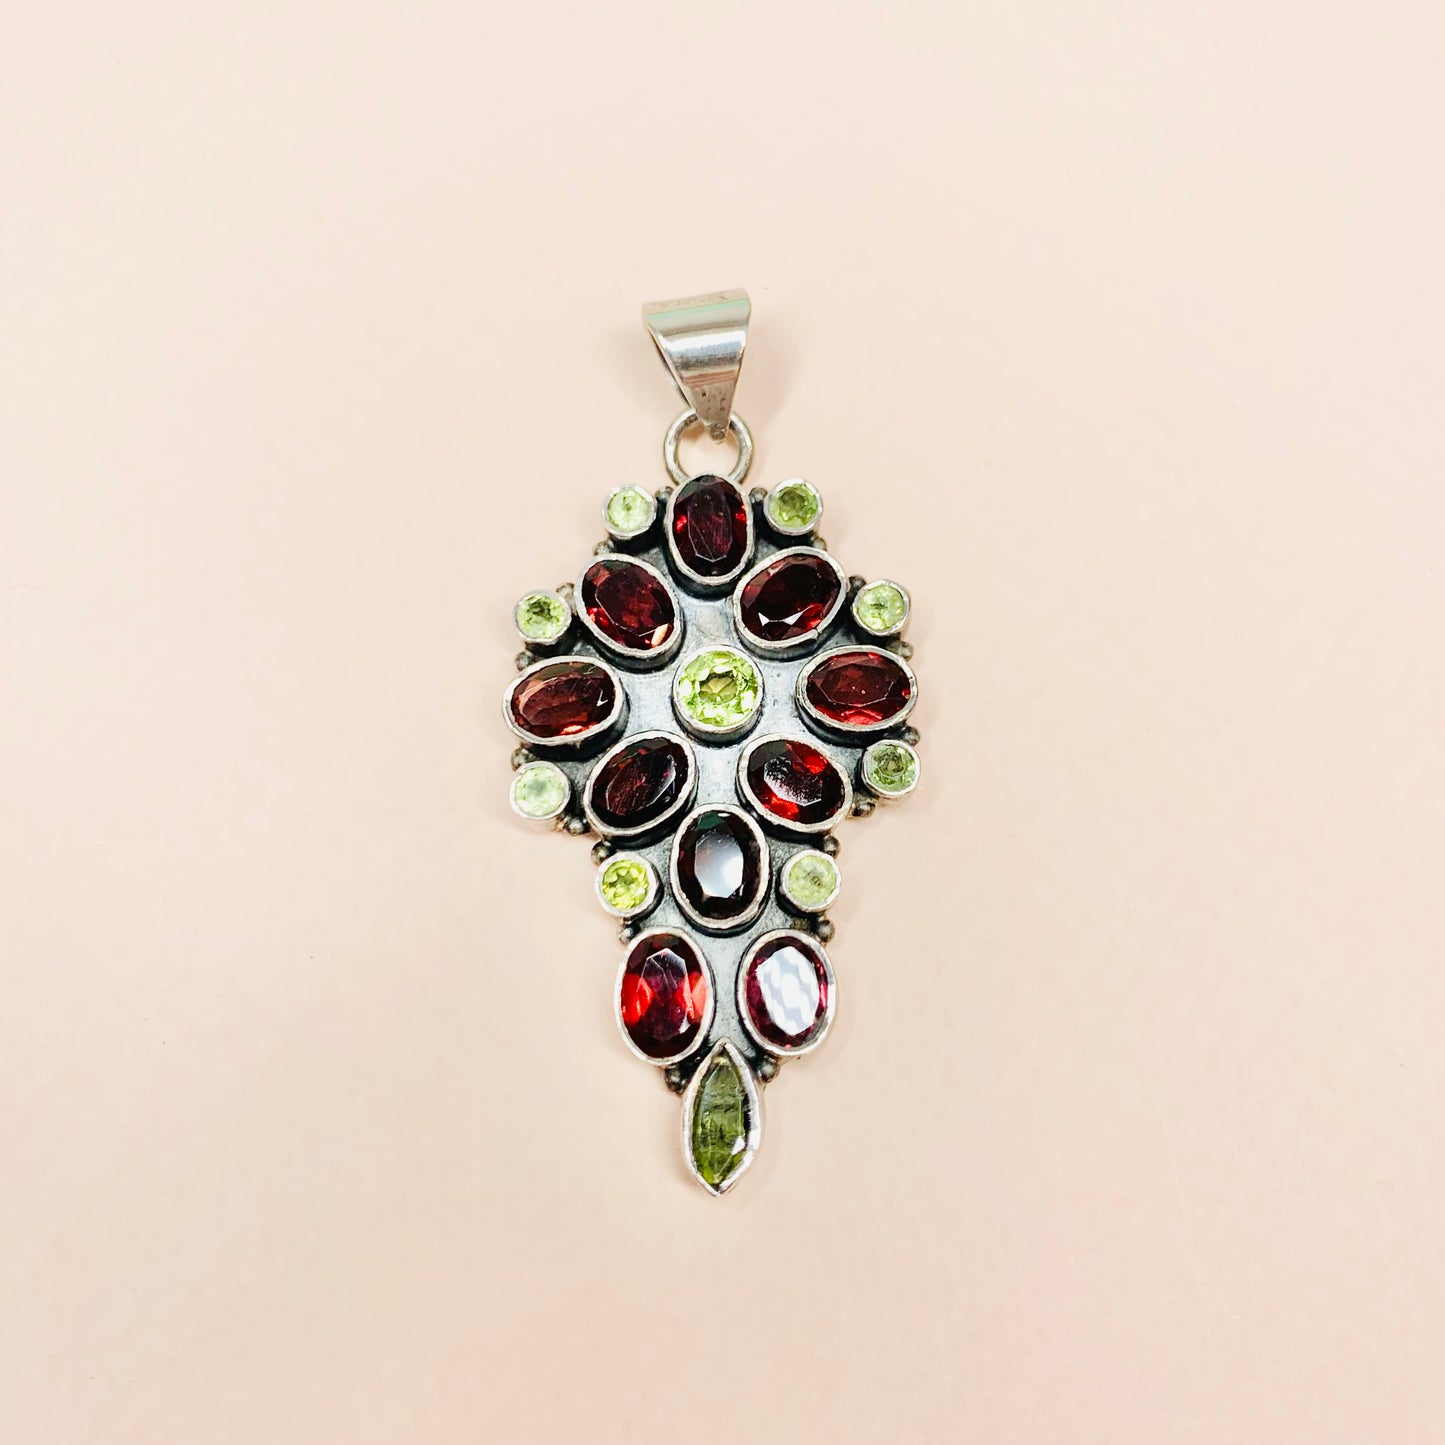 Vintage silver drop pendant with garnet and peridot